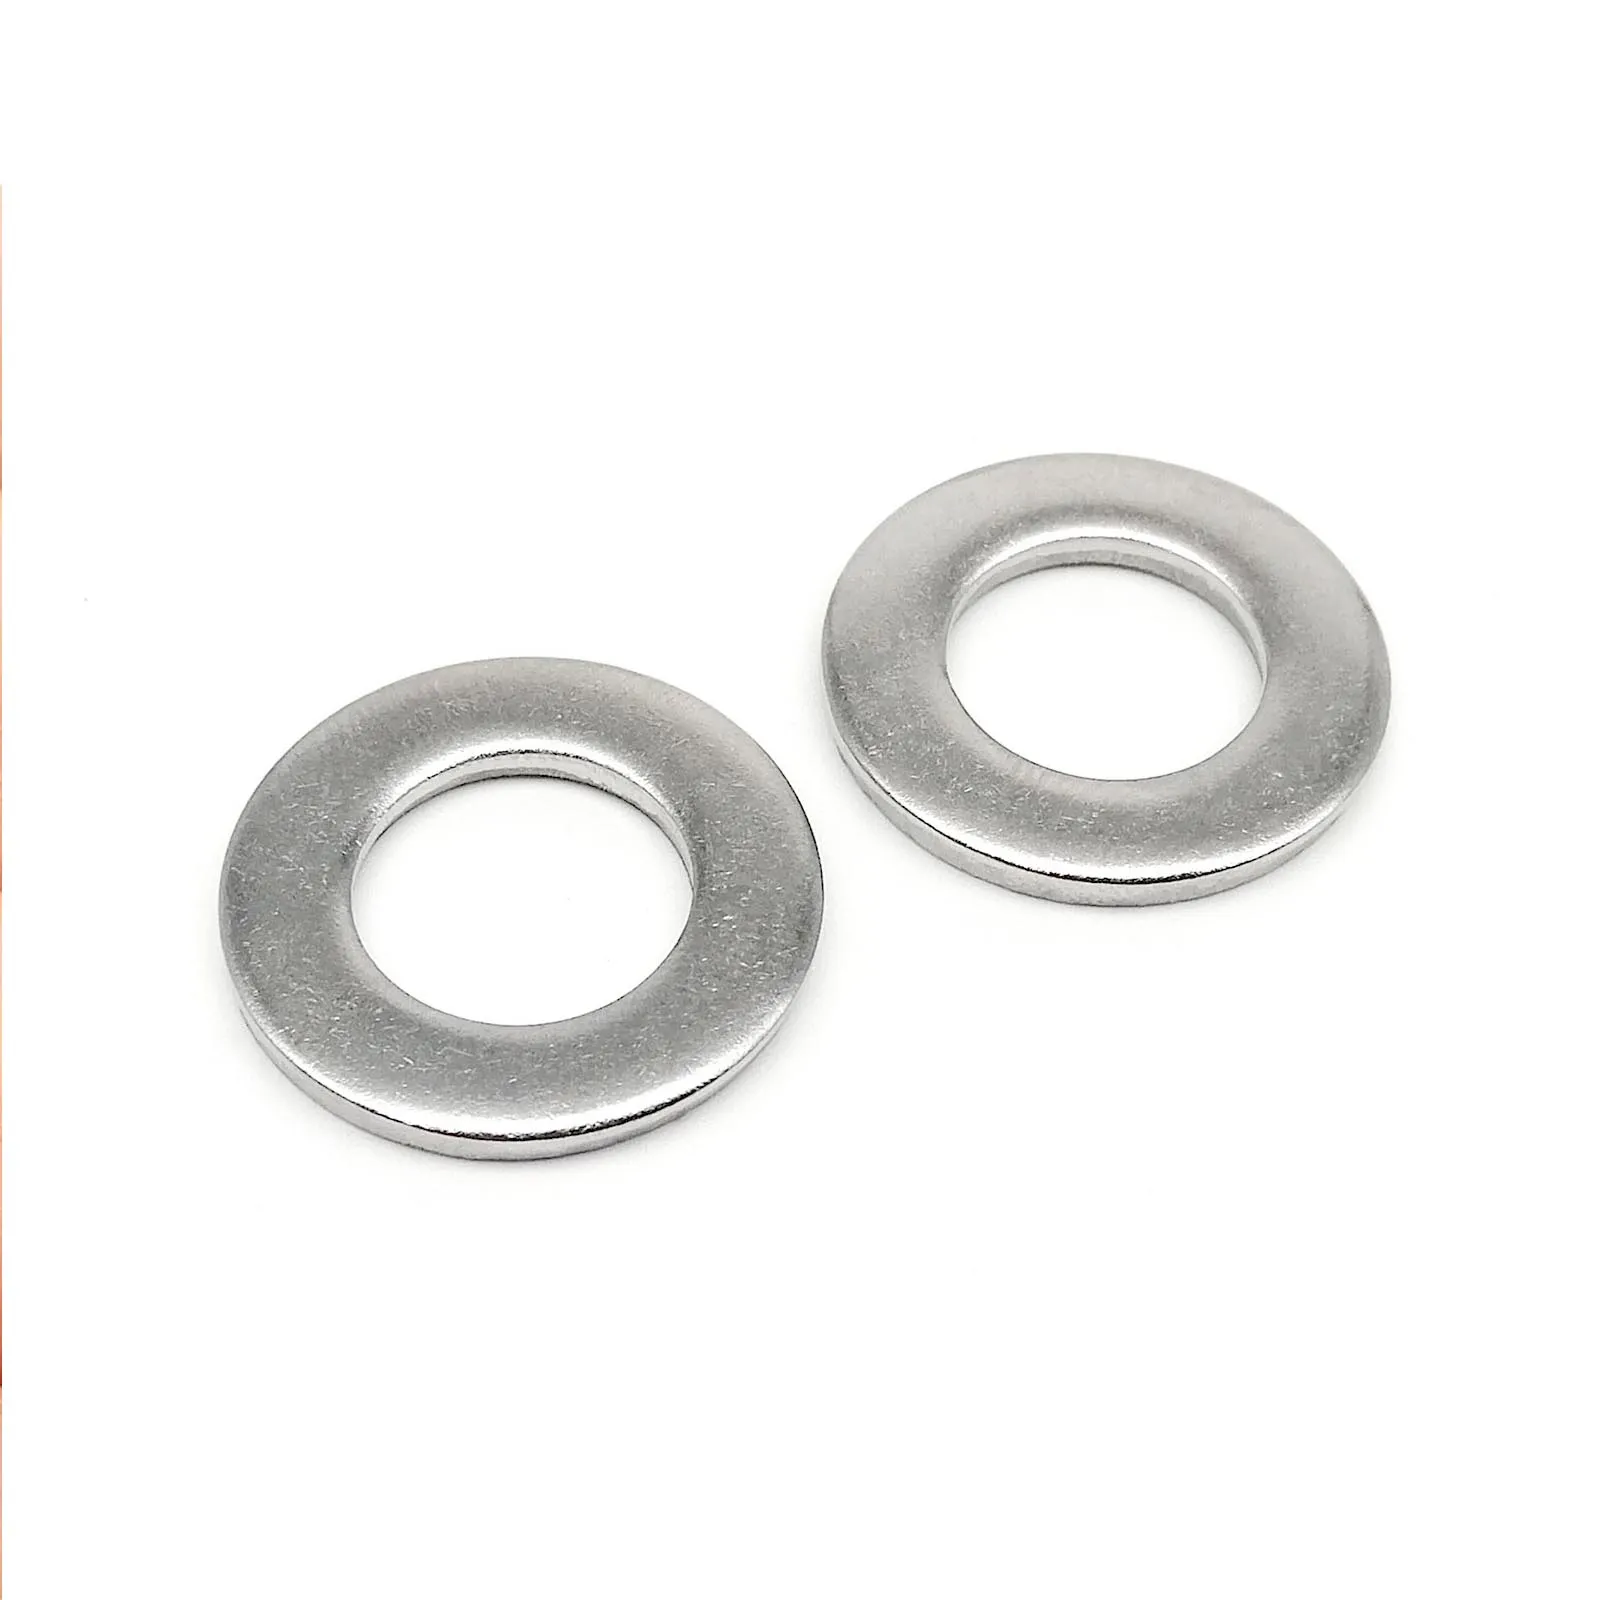 GB97 DIN125 A2-70 304 Stainless Steel Flat Washer Plain Gasket M1.6 M2 M2.5 M3 M3.5 M4 M5 M6 M8 M10 M12 M14 M16 M18 M20 M22 M24